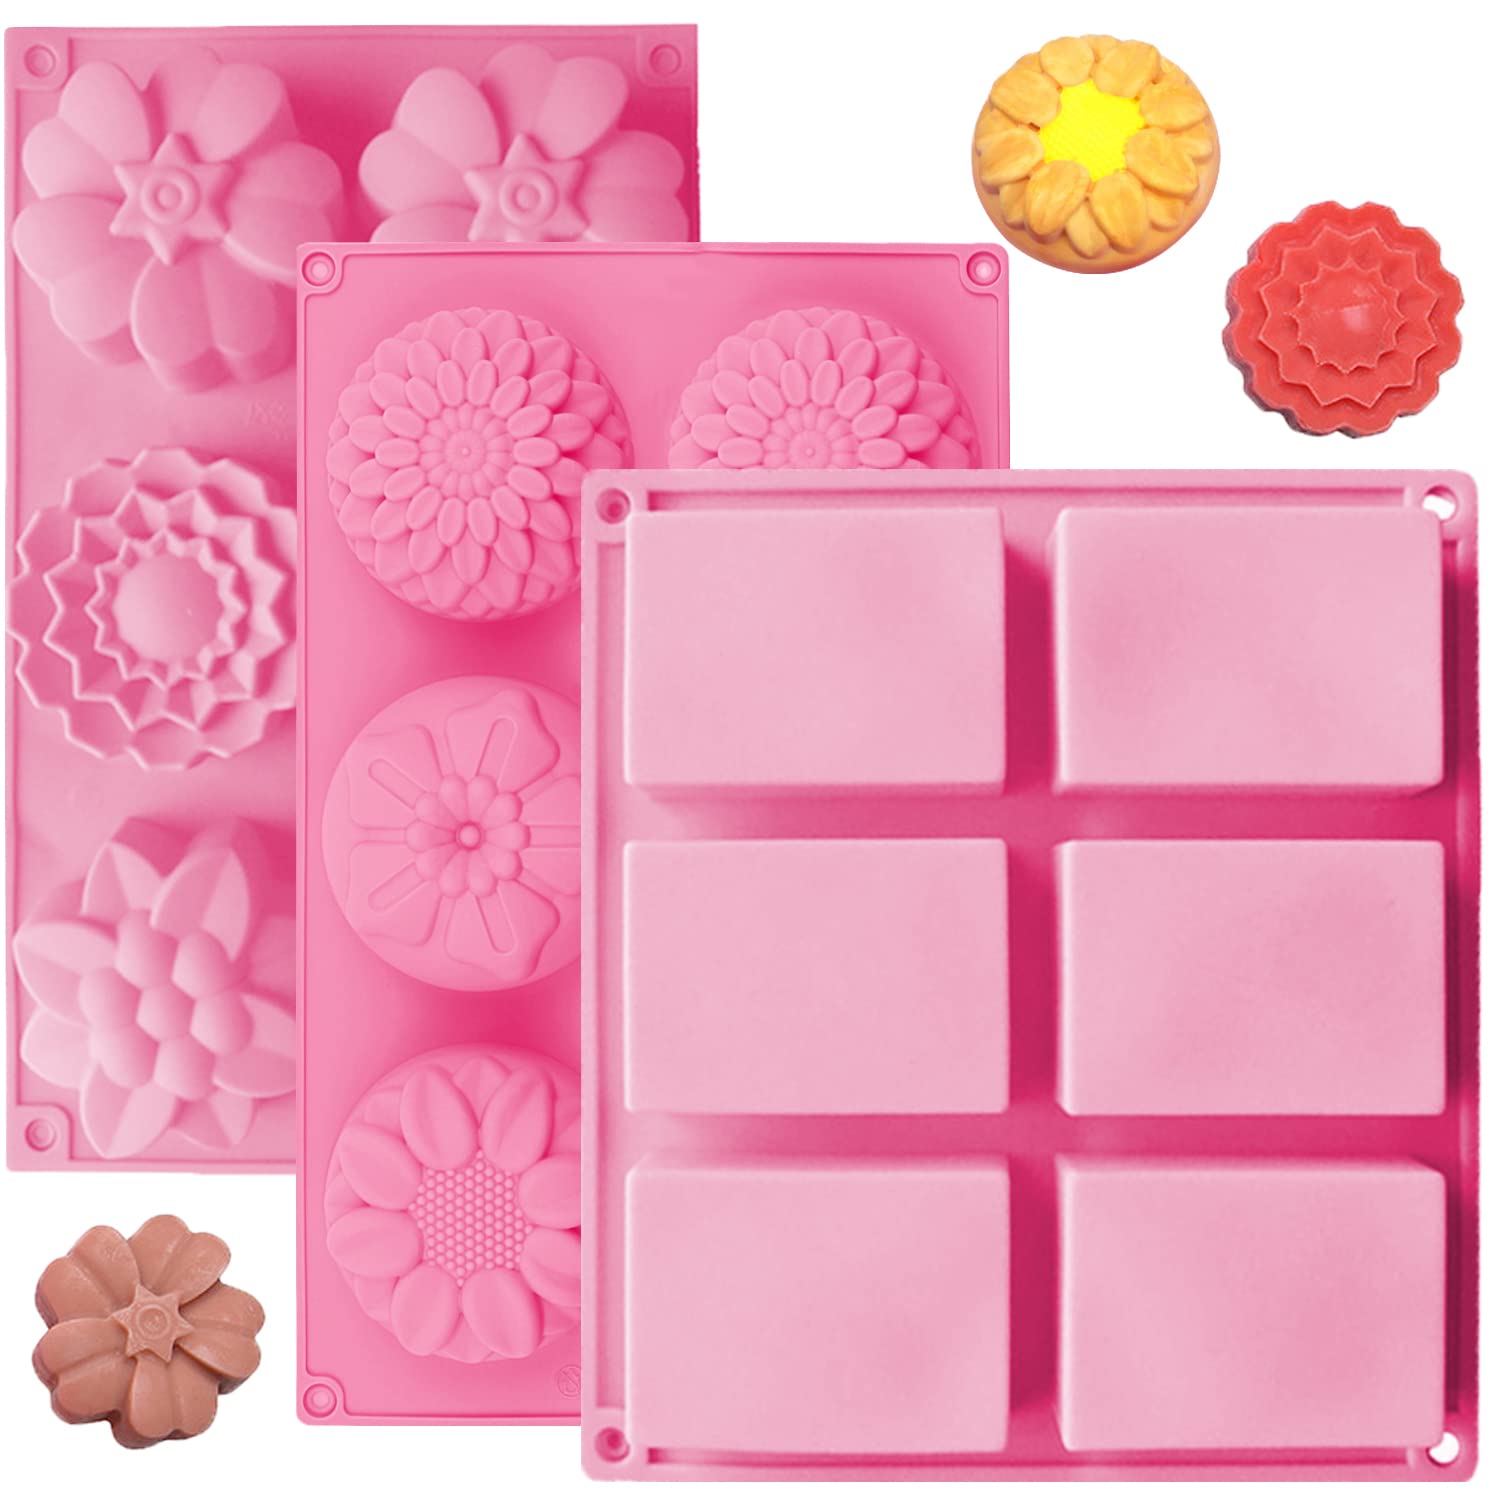 OBSGUMU 3 Pack Silicone Soap Molds 6 Cavities Flowers Soap Mold